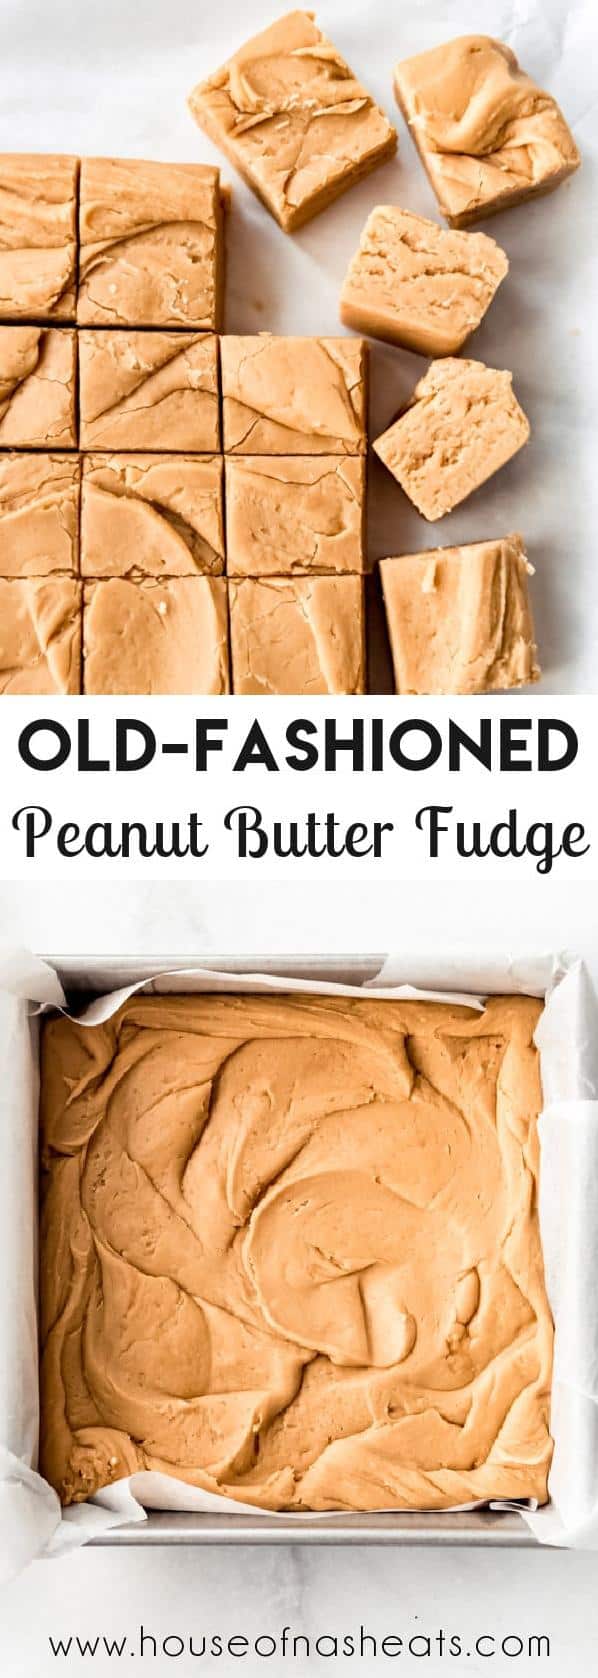  The perfect sweet treat for all the peanut butter lovers out there!